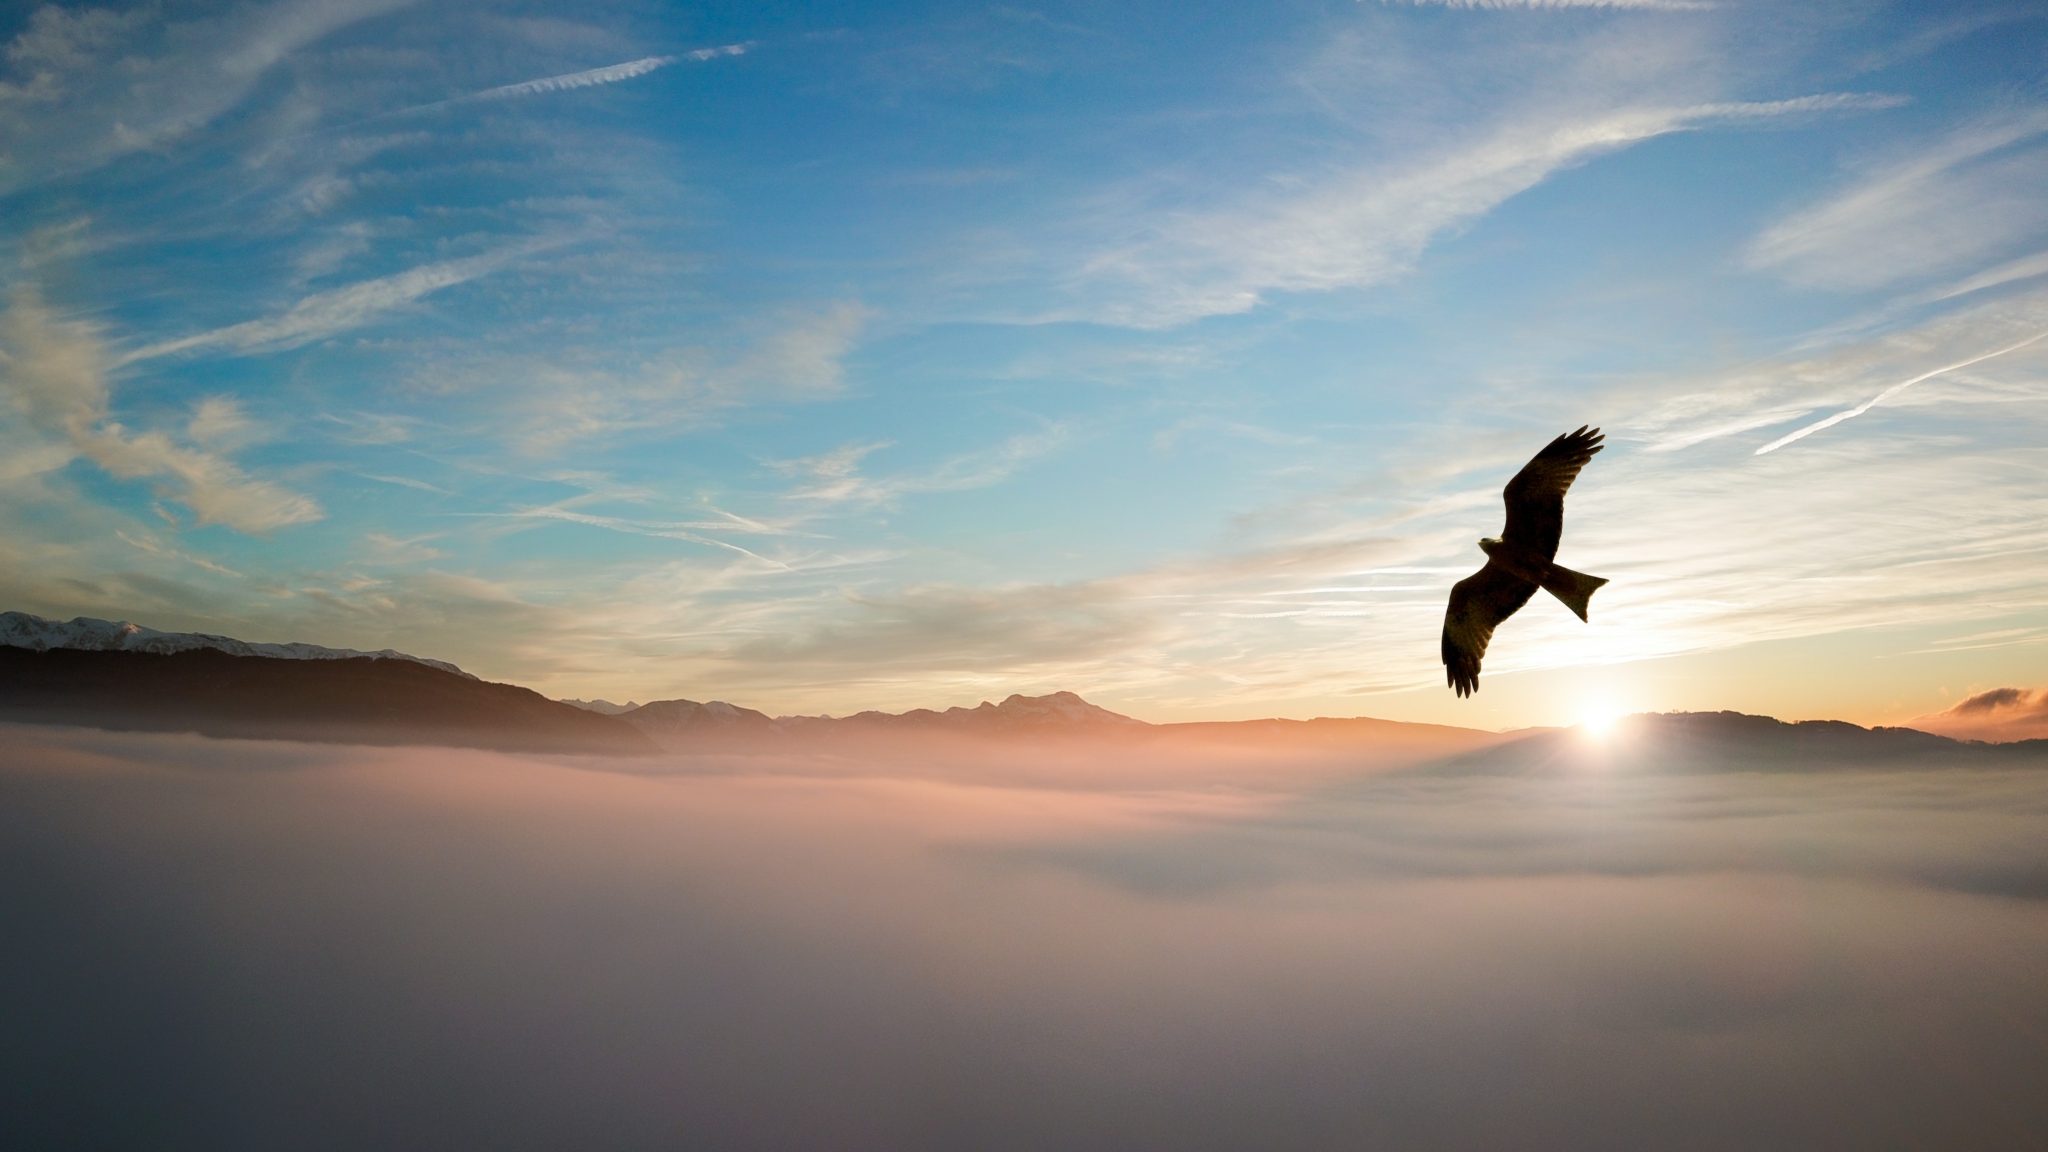 Set to soar - eagle flying over mountains through the clouds with the sun setting in the background